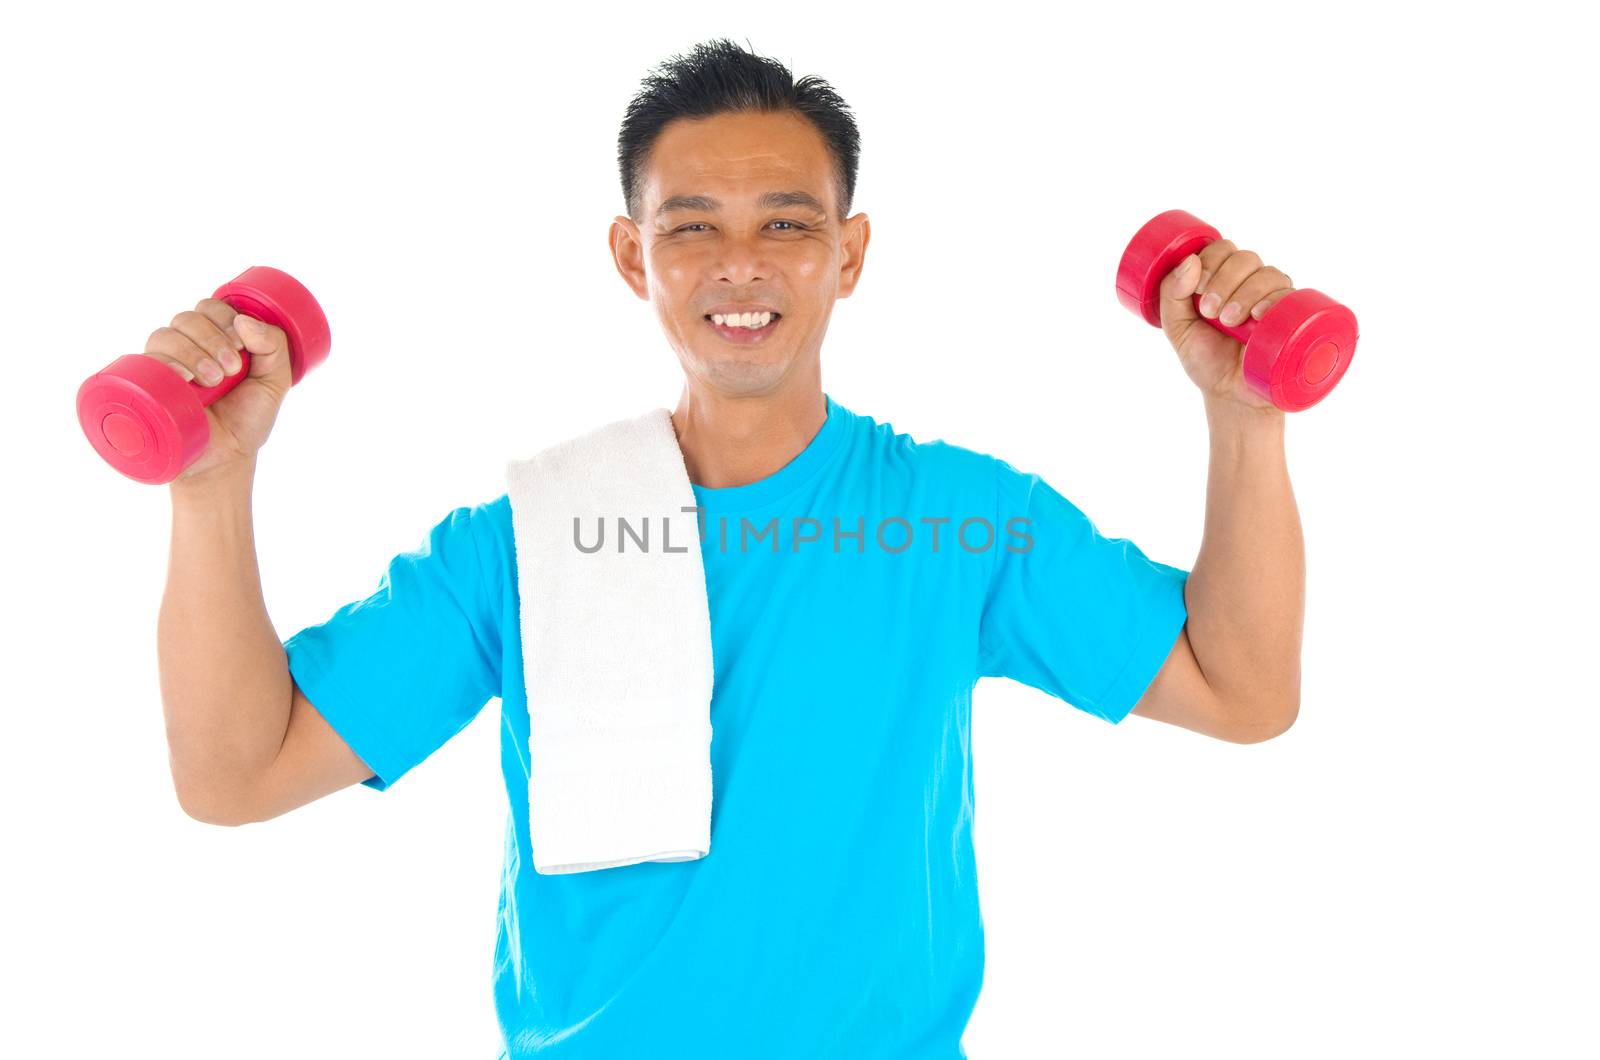 Portrait of fitness man working out with free weights in studio

